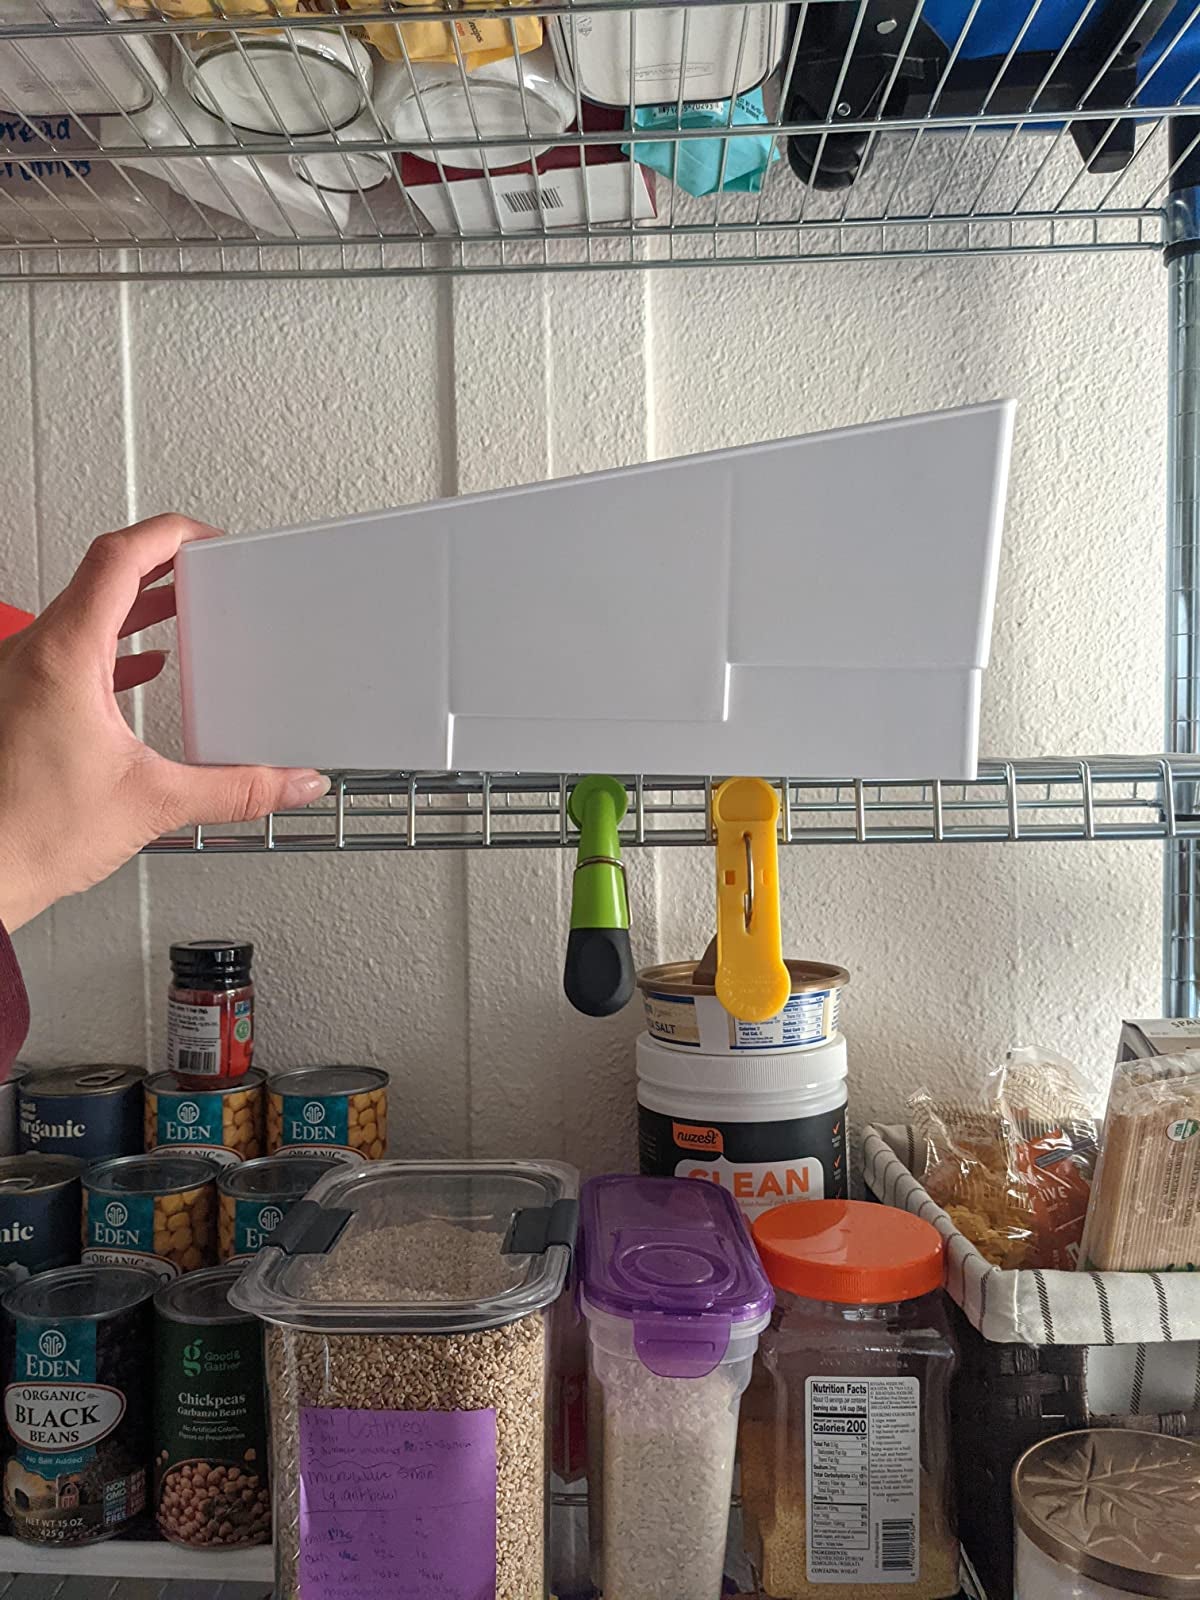 10 Kitchen Organization Products You Didn't Know You Needed